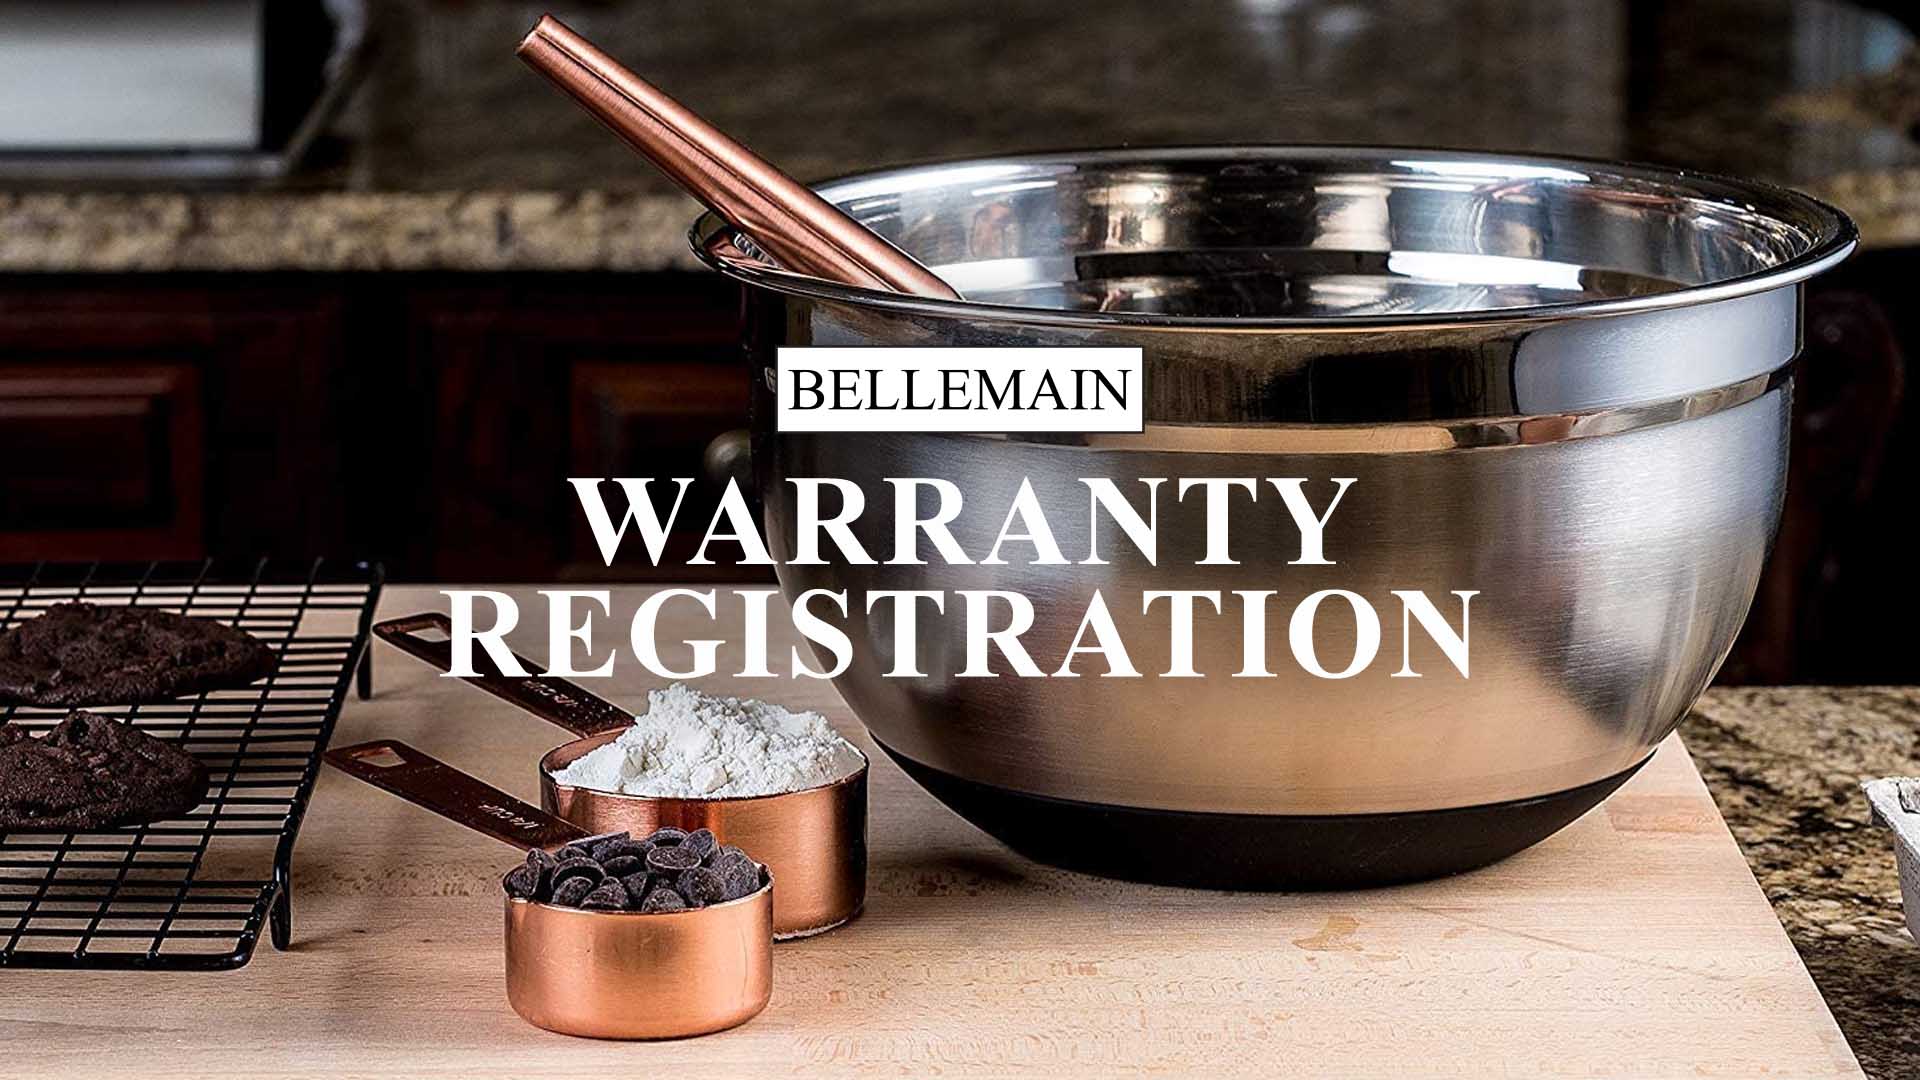 https://thebellemain.com/wp-content/uploads/2022/10/Bellemain-Products-Warranty-Registration.jpg